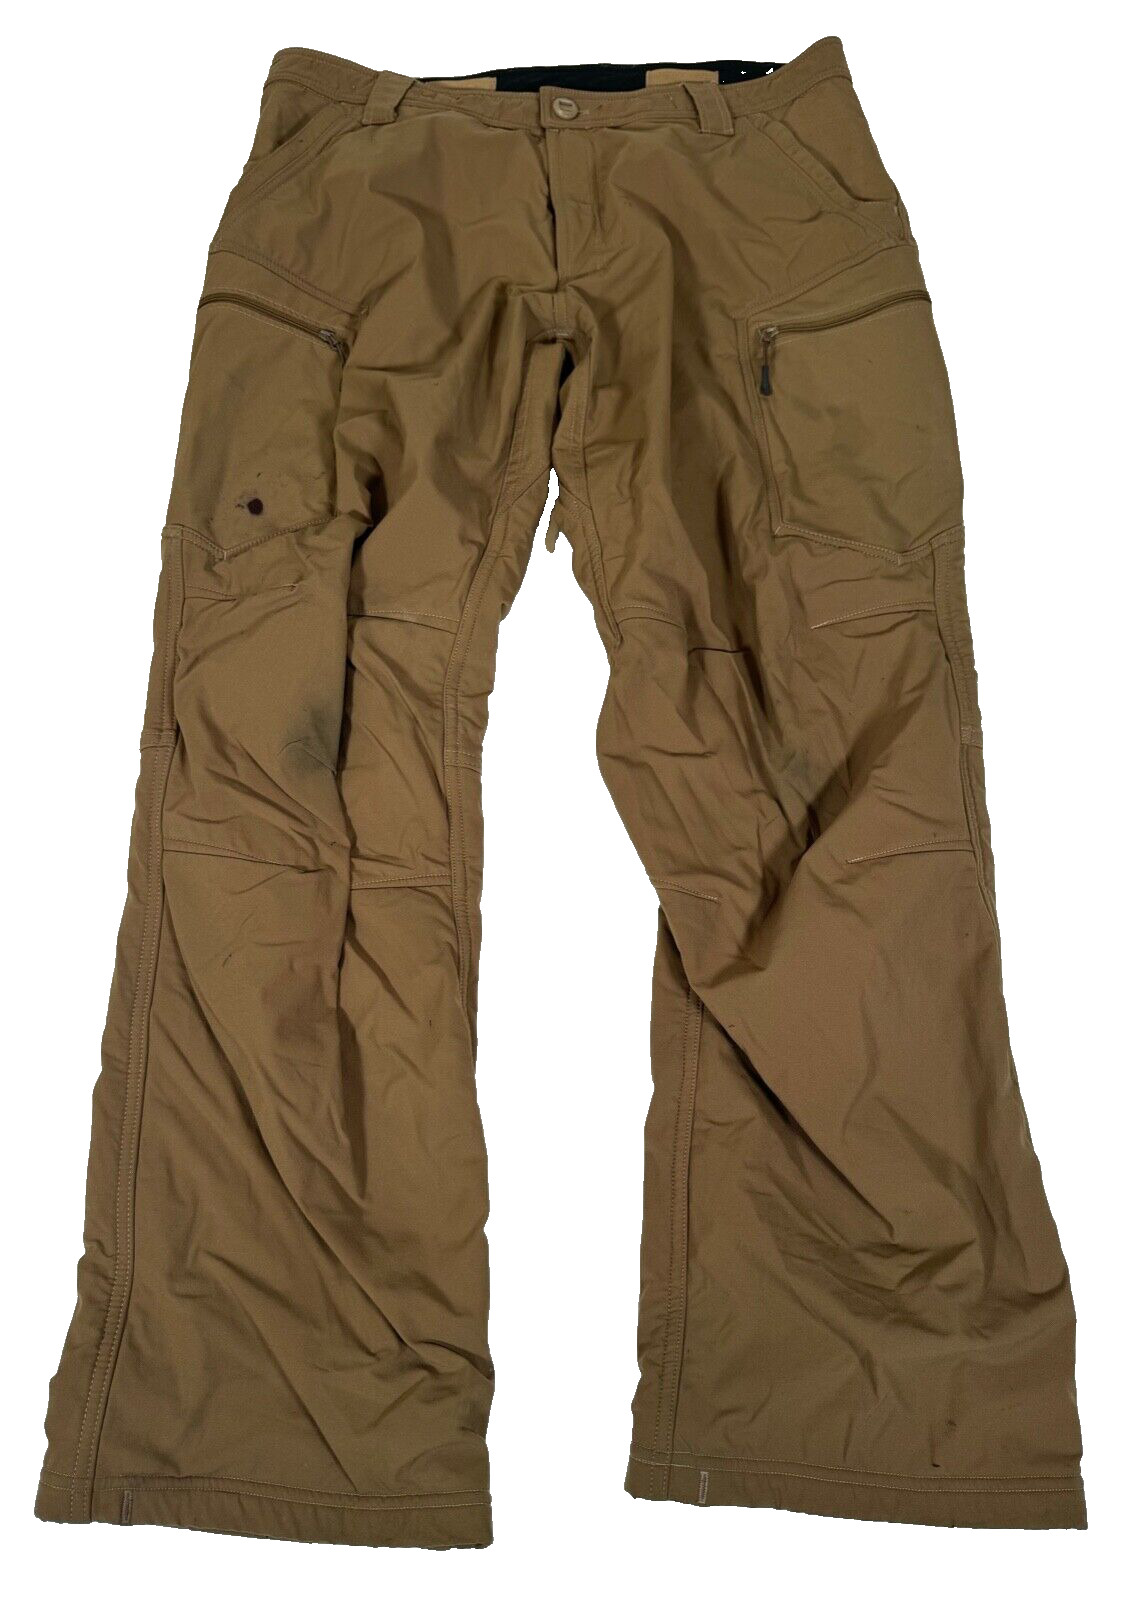 Beyond Clothing A5 Rig Light Soft Shell Pants Coyote Brown Large